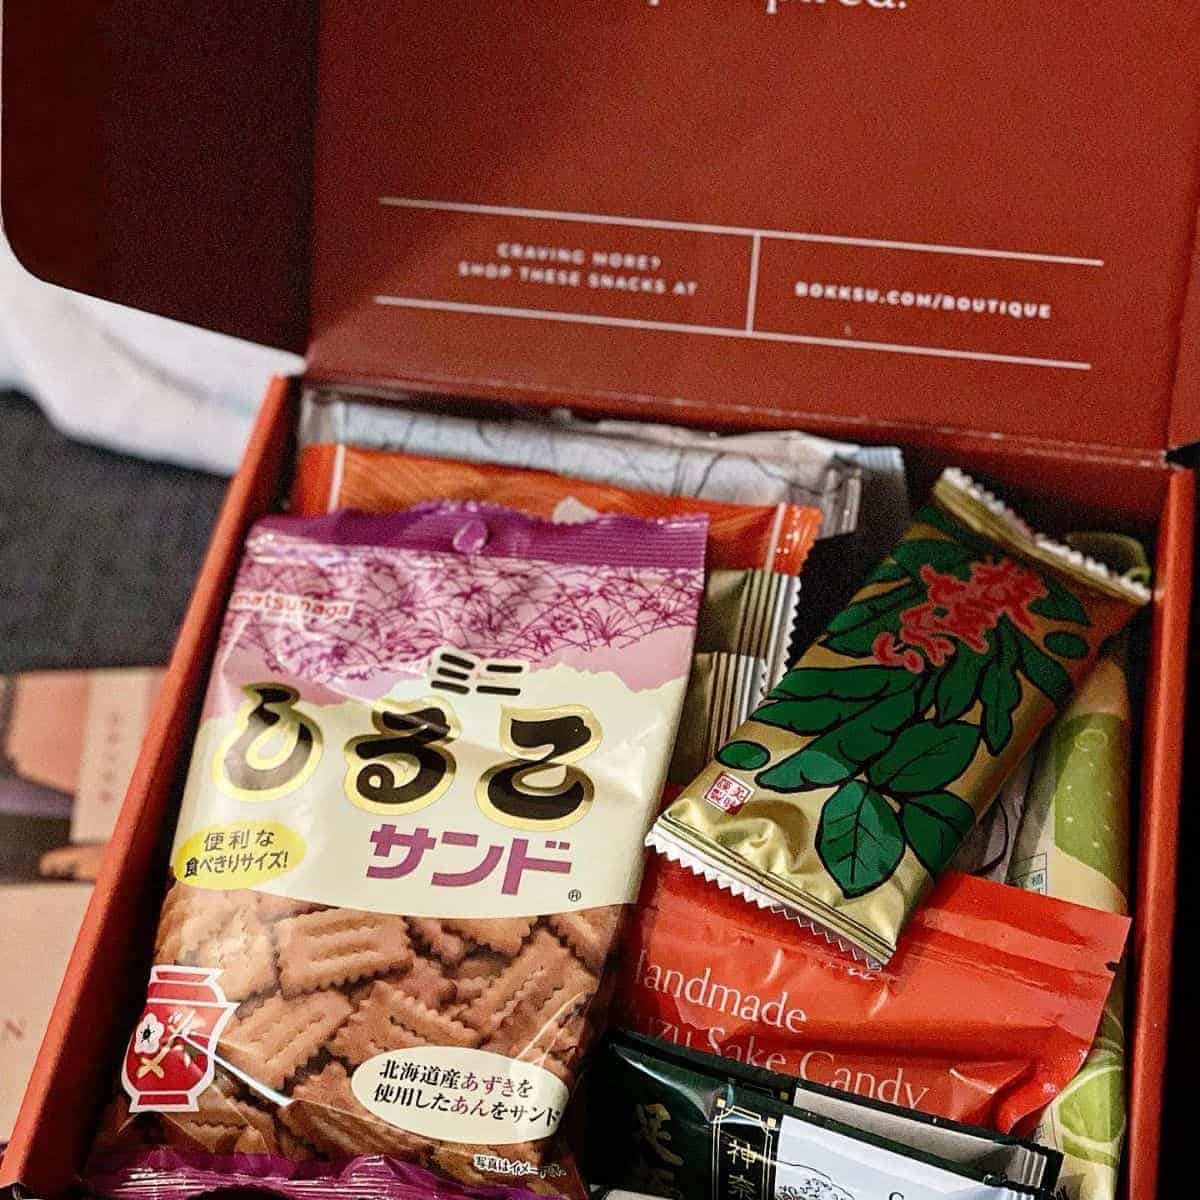 Traditional Asian snacks beautifully arranged in a red container